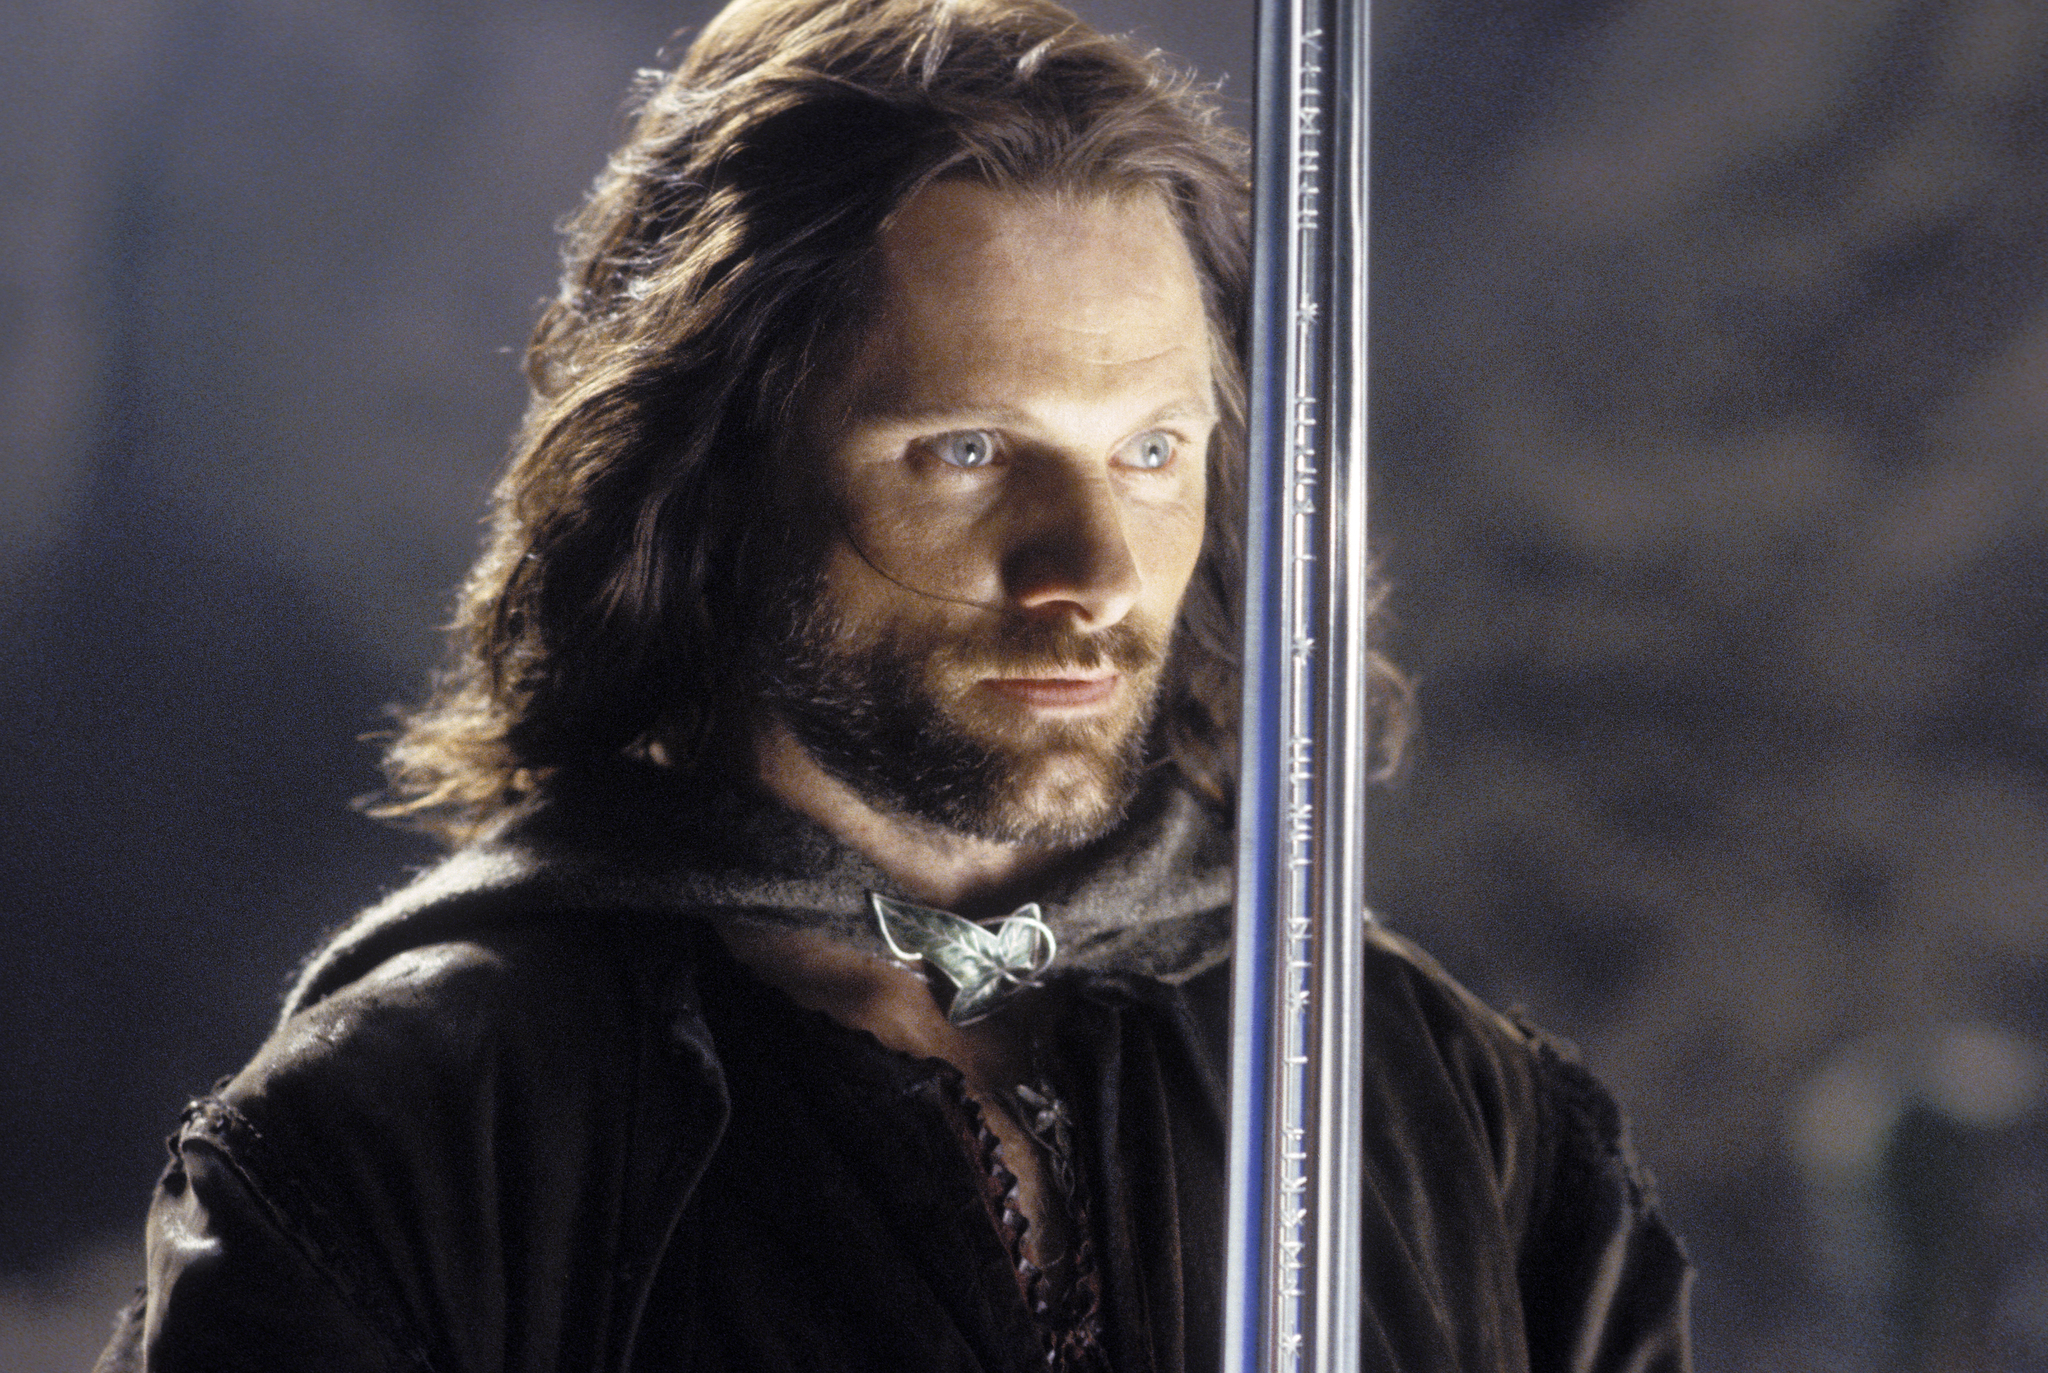 Viggo Mortensen in The Lord of the Rings: The Return of the King (2003)